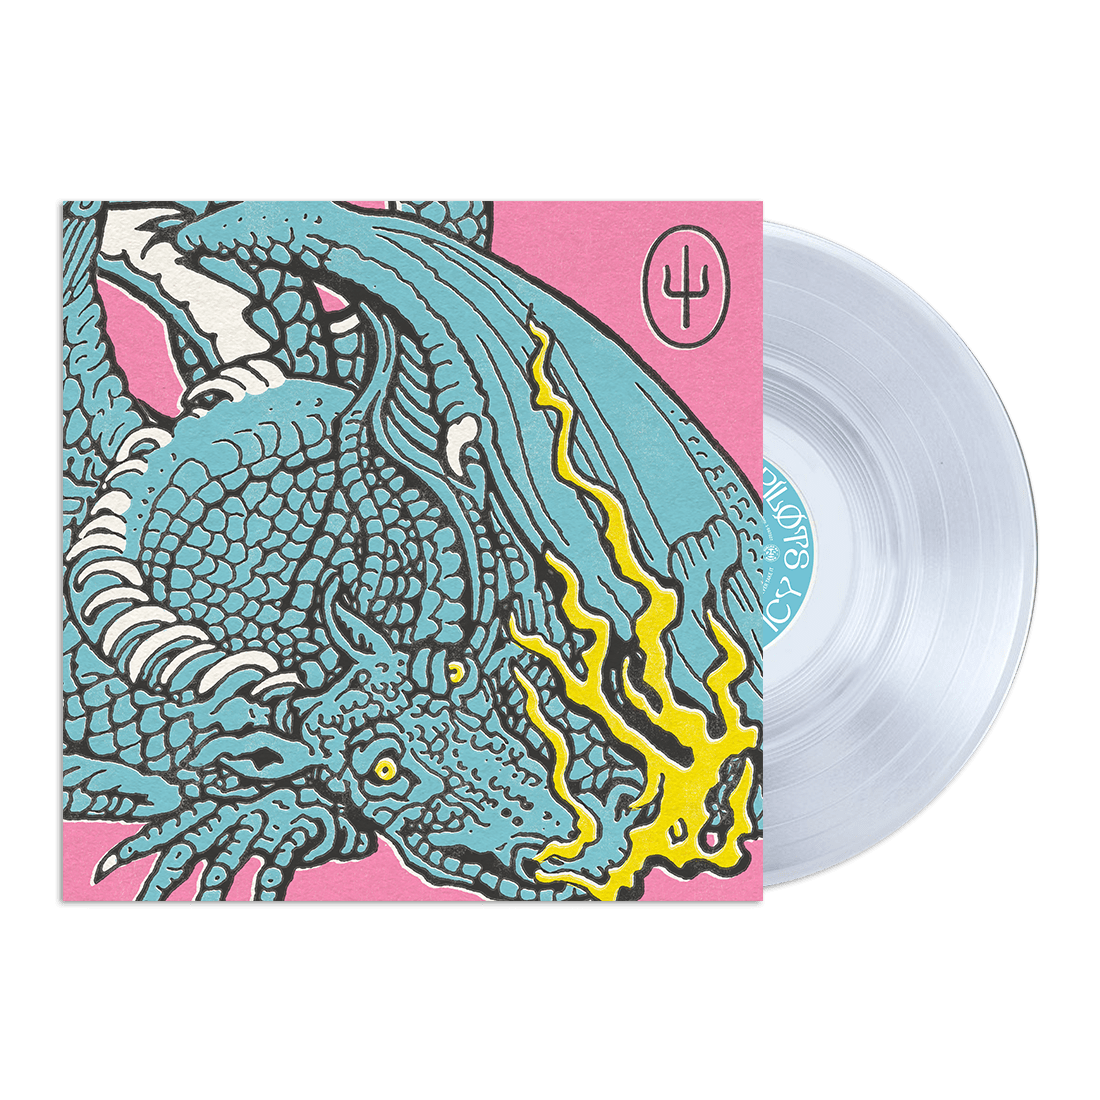 Scaled and Icy Vinyl LP (Crystal Clear)